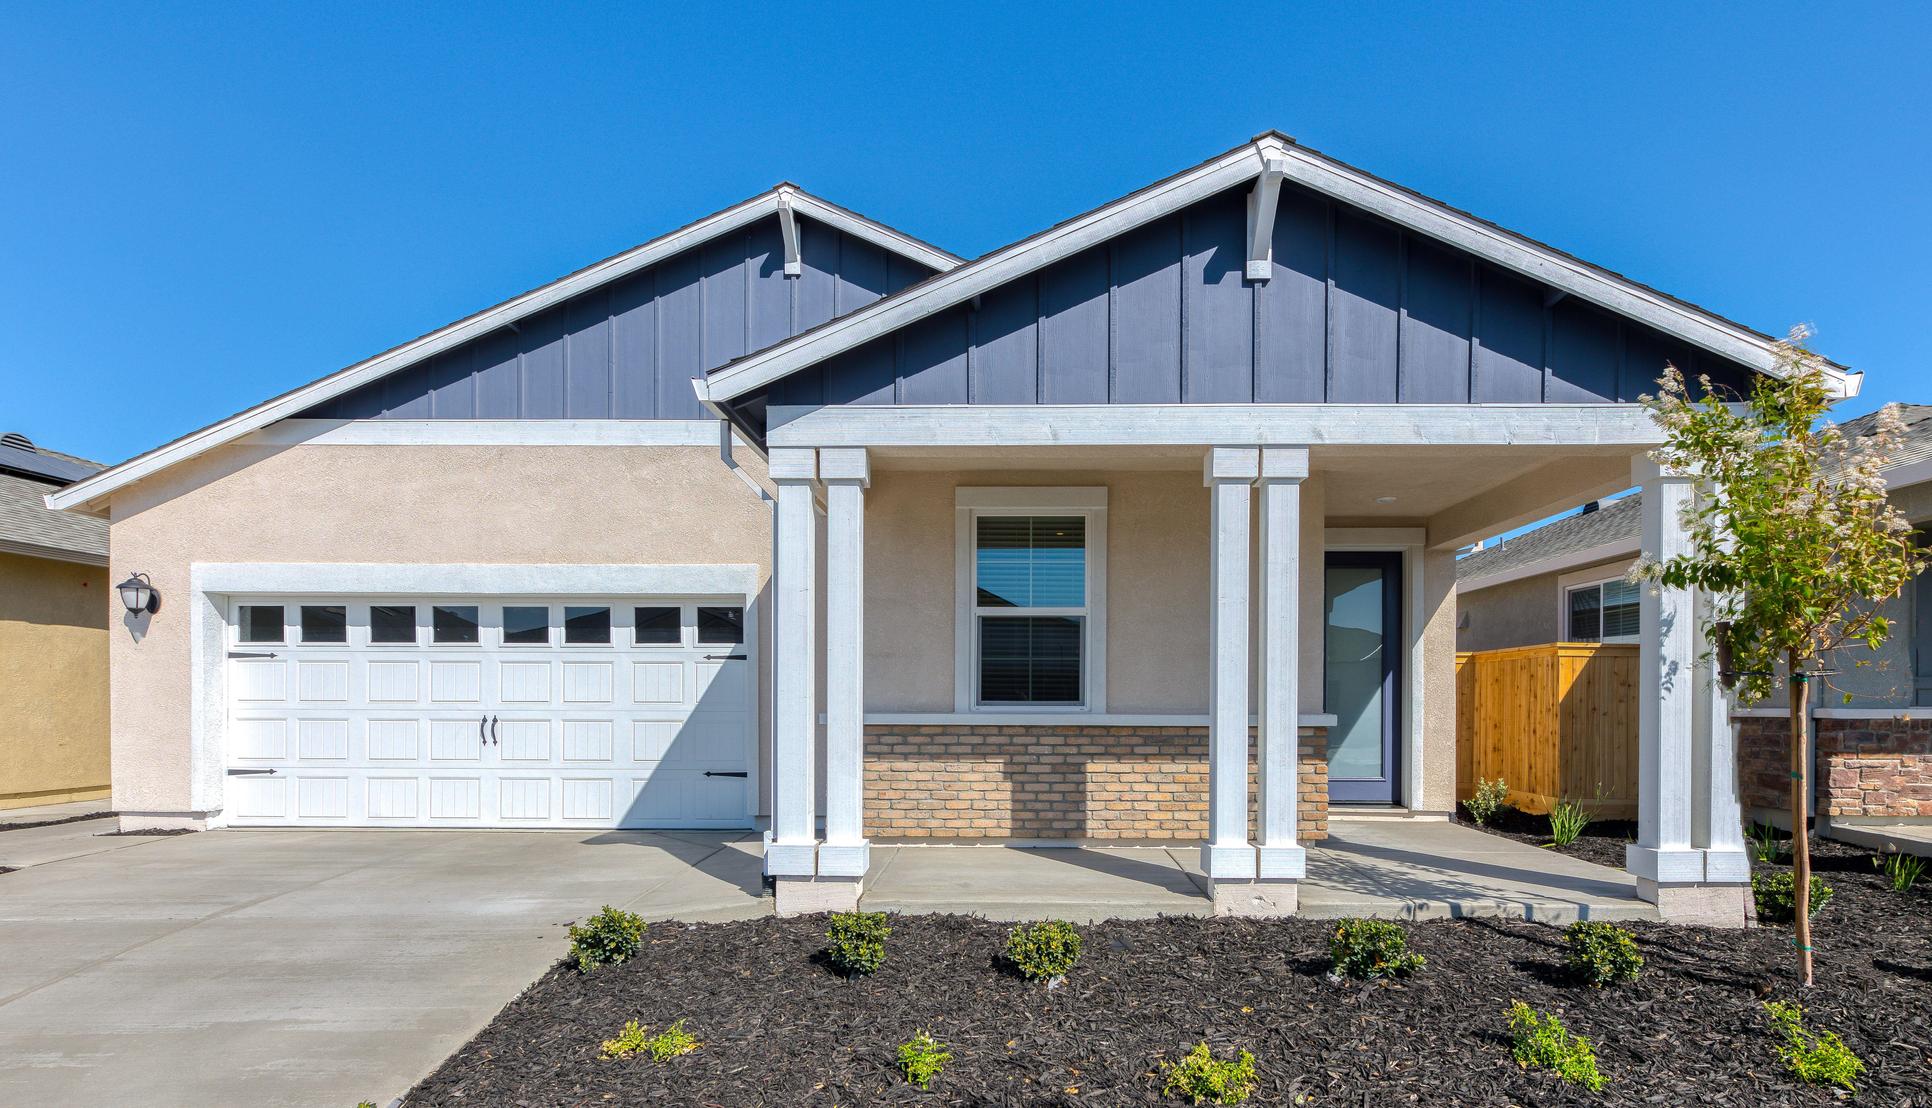 Summit at Liberty, a 55+ community:Each home includes a large covered front porch and back patio!